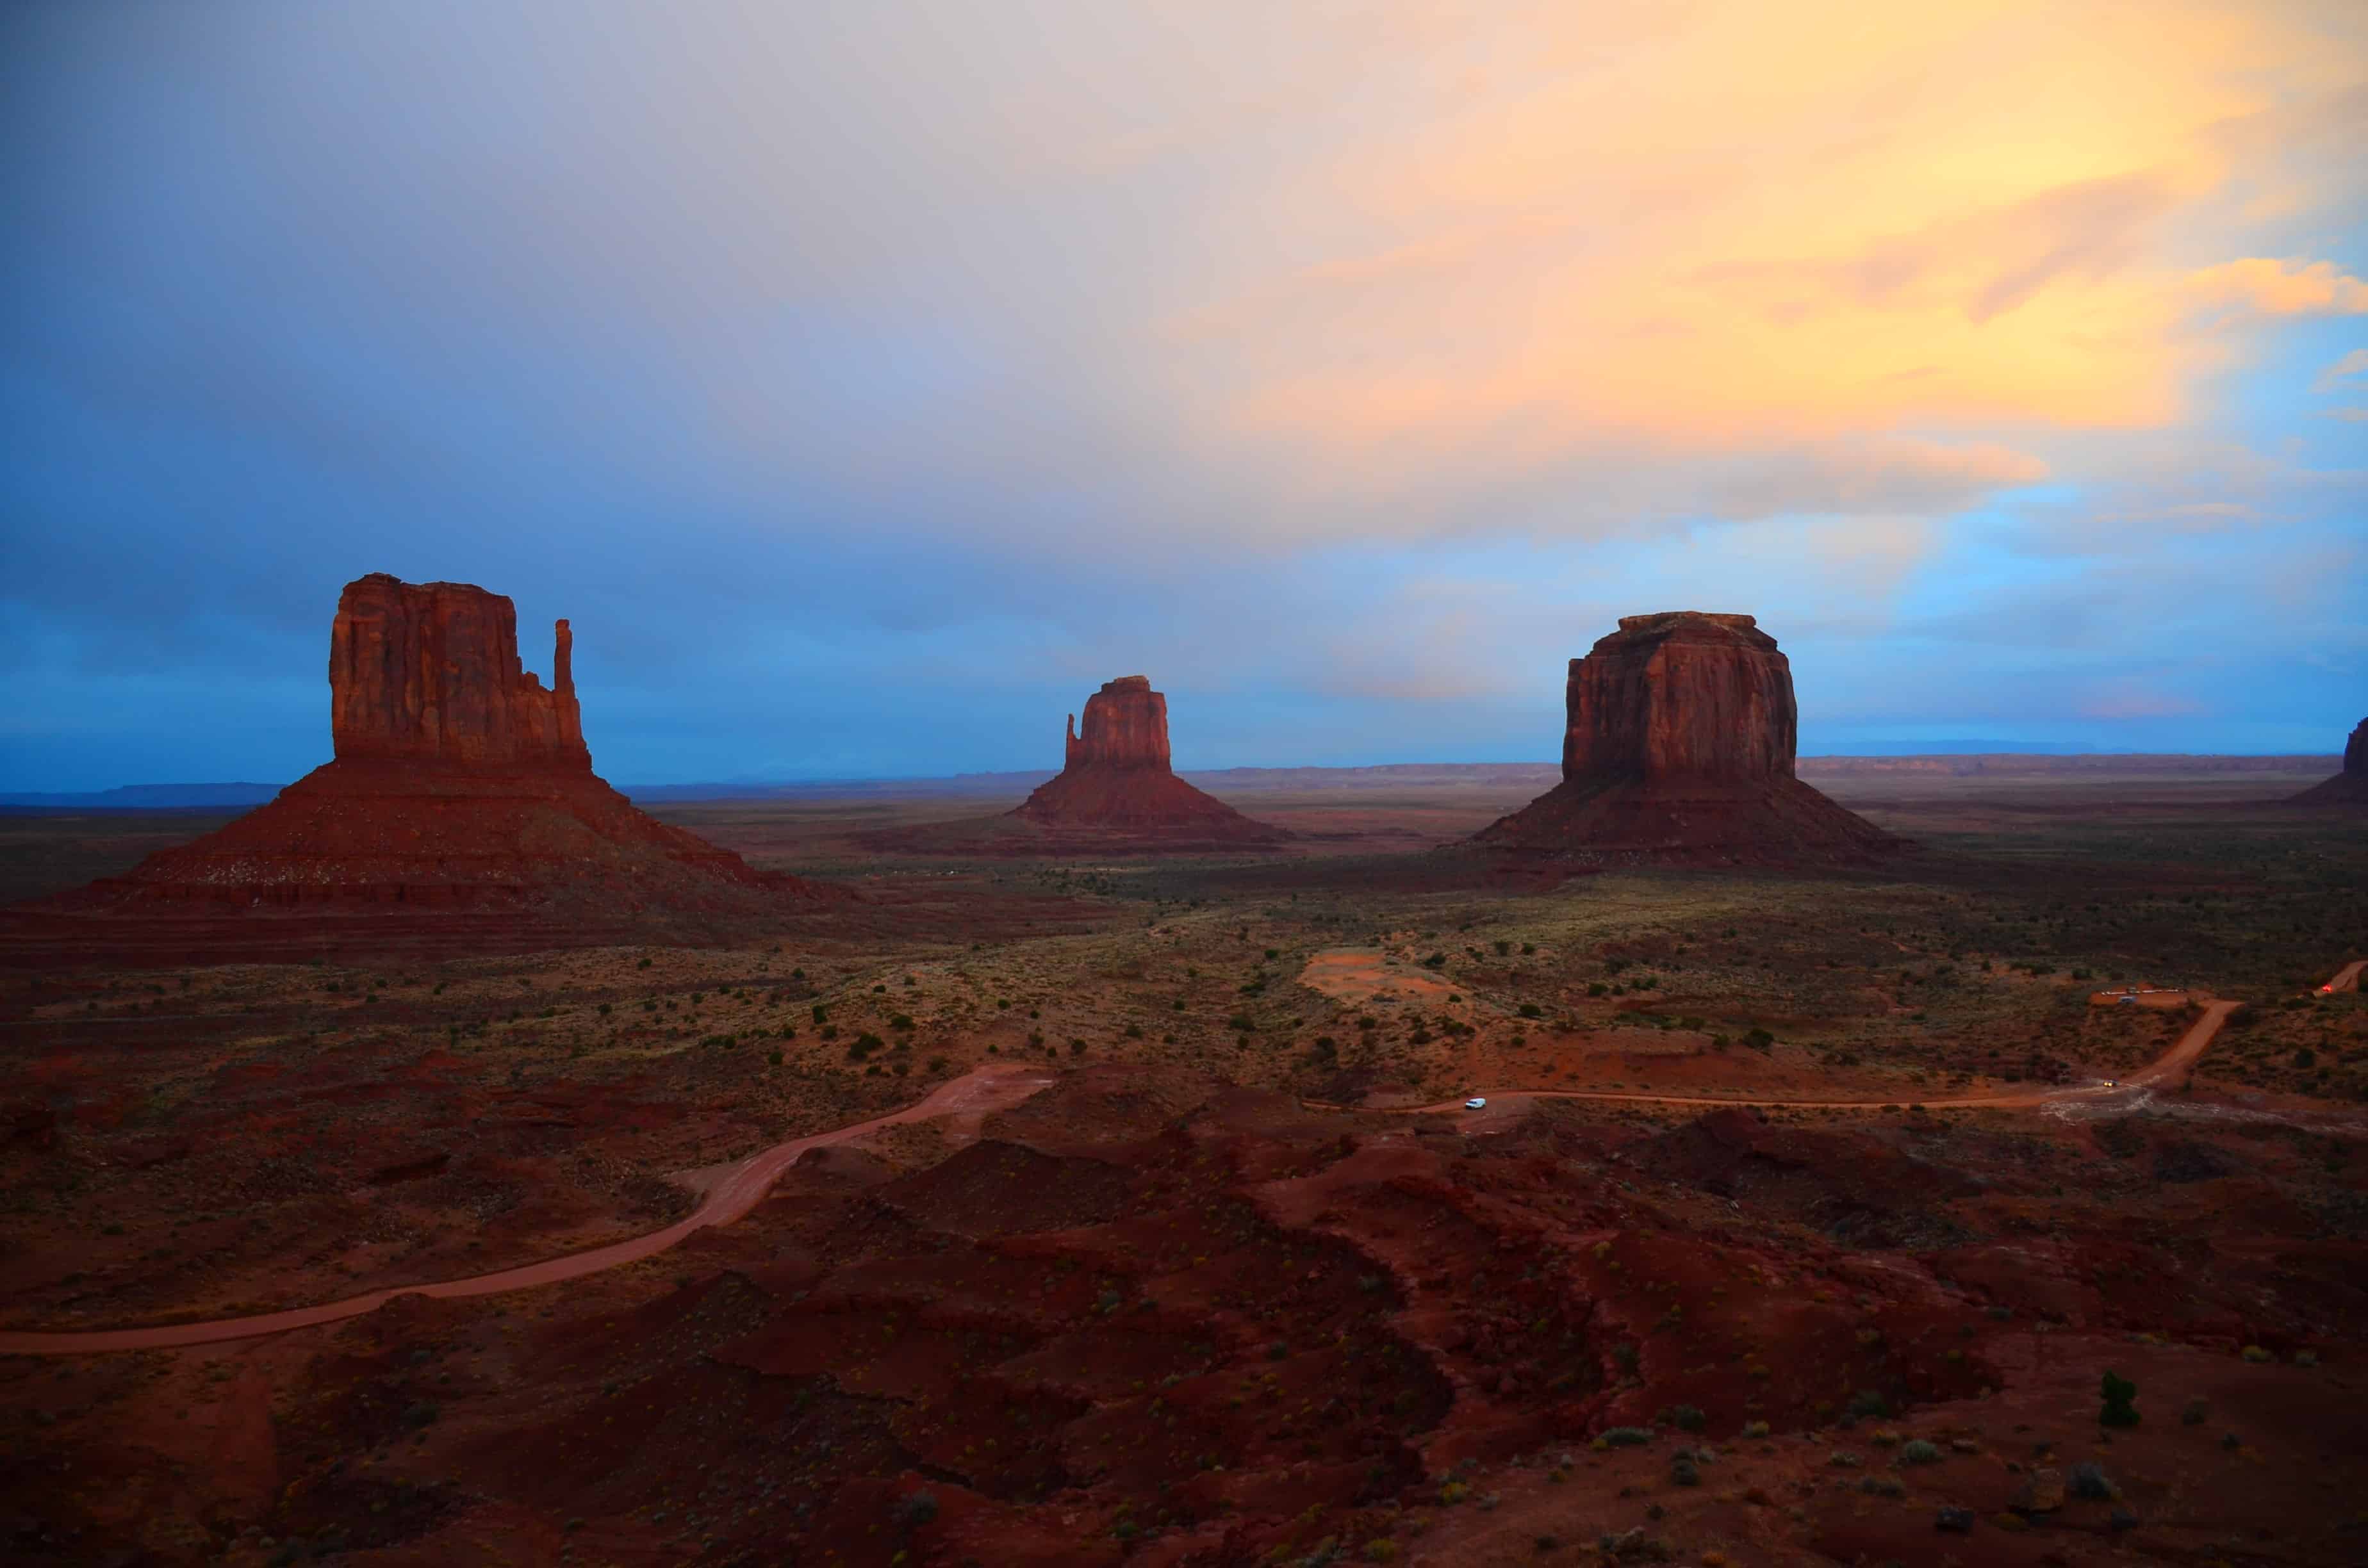 Playing with my camera at Monument Valley Tribal Park in Arizona